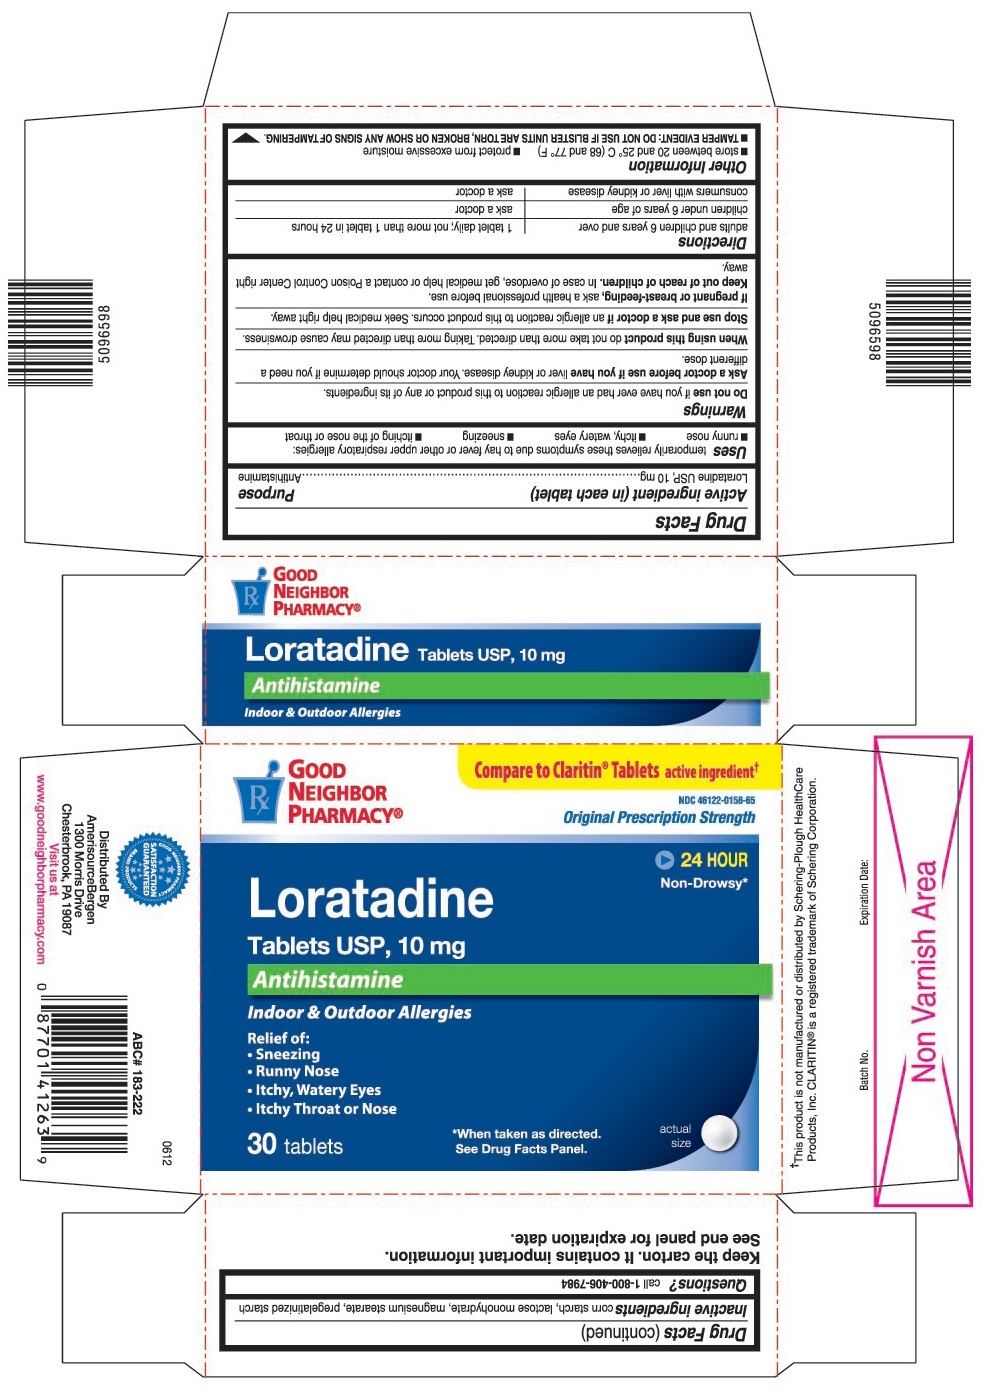 This is the 30 count blister carton label for Good Neighbor Pharmacy Loratadine tablets USP, 10 mg.